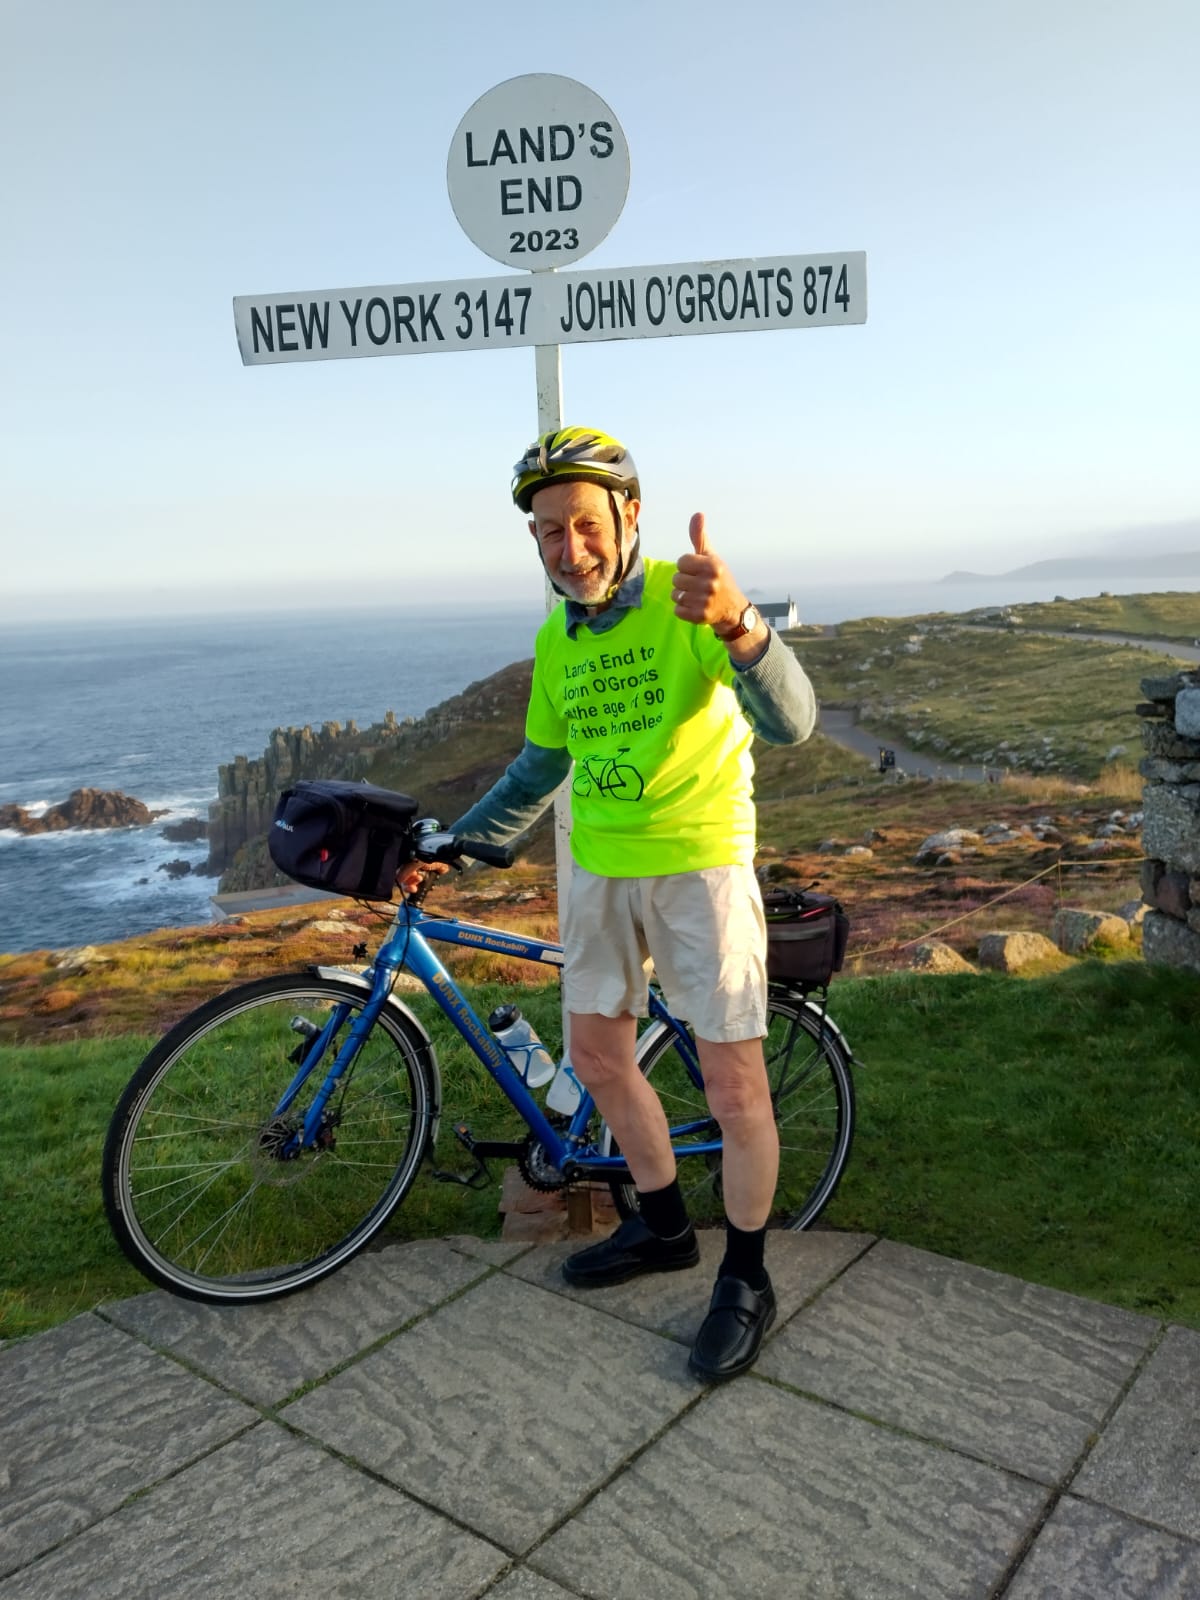 A man stands with a bike under the Land’s End signpost. He is wearing a bright yellow T-shirt and giving a thumbs up to the camera